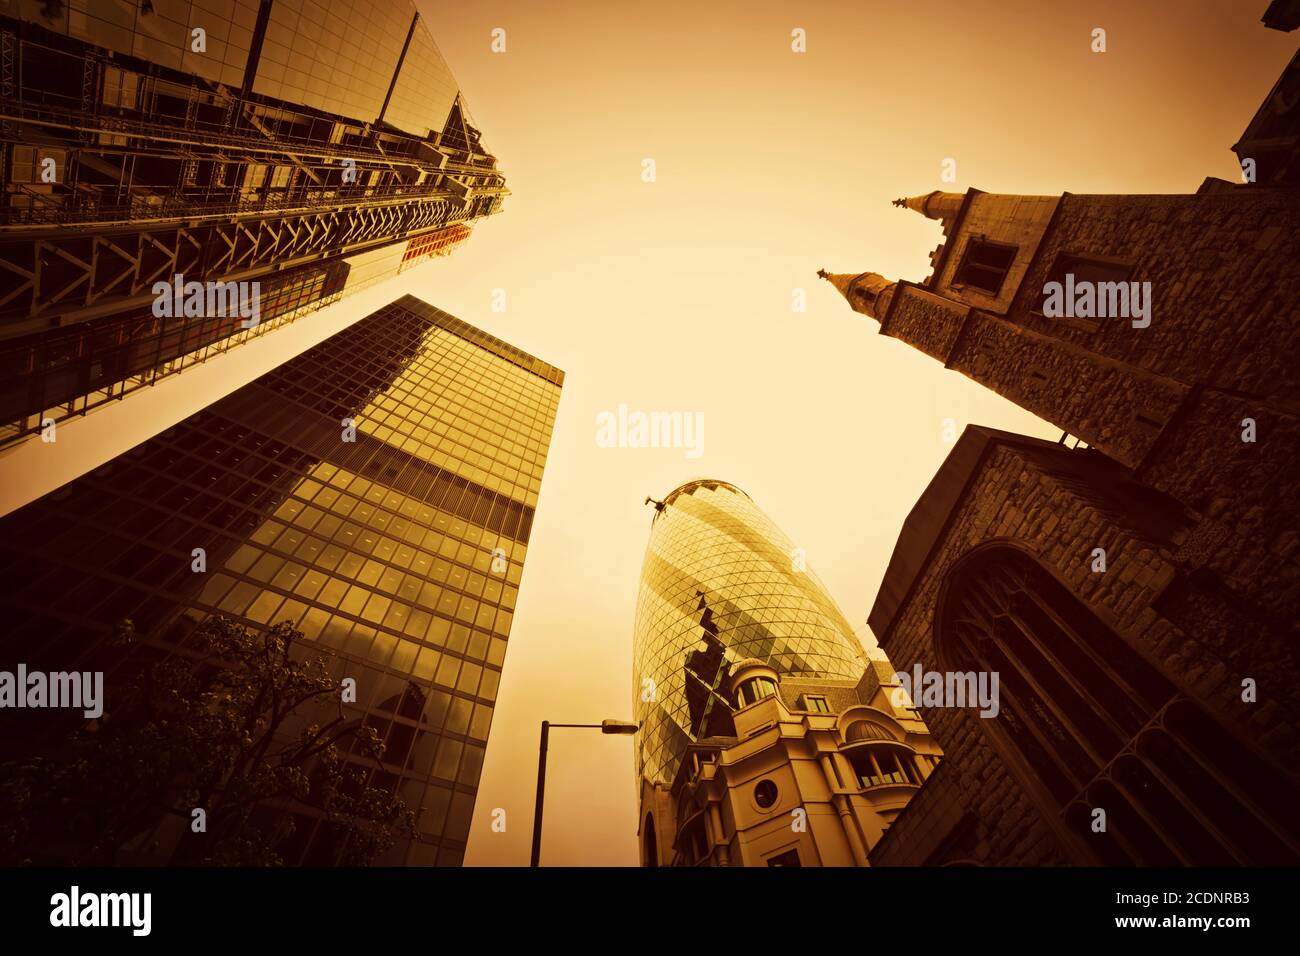 Business architecture, skyscrapers in London, the UK. Golden tint Stock Photo